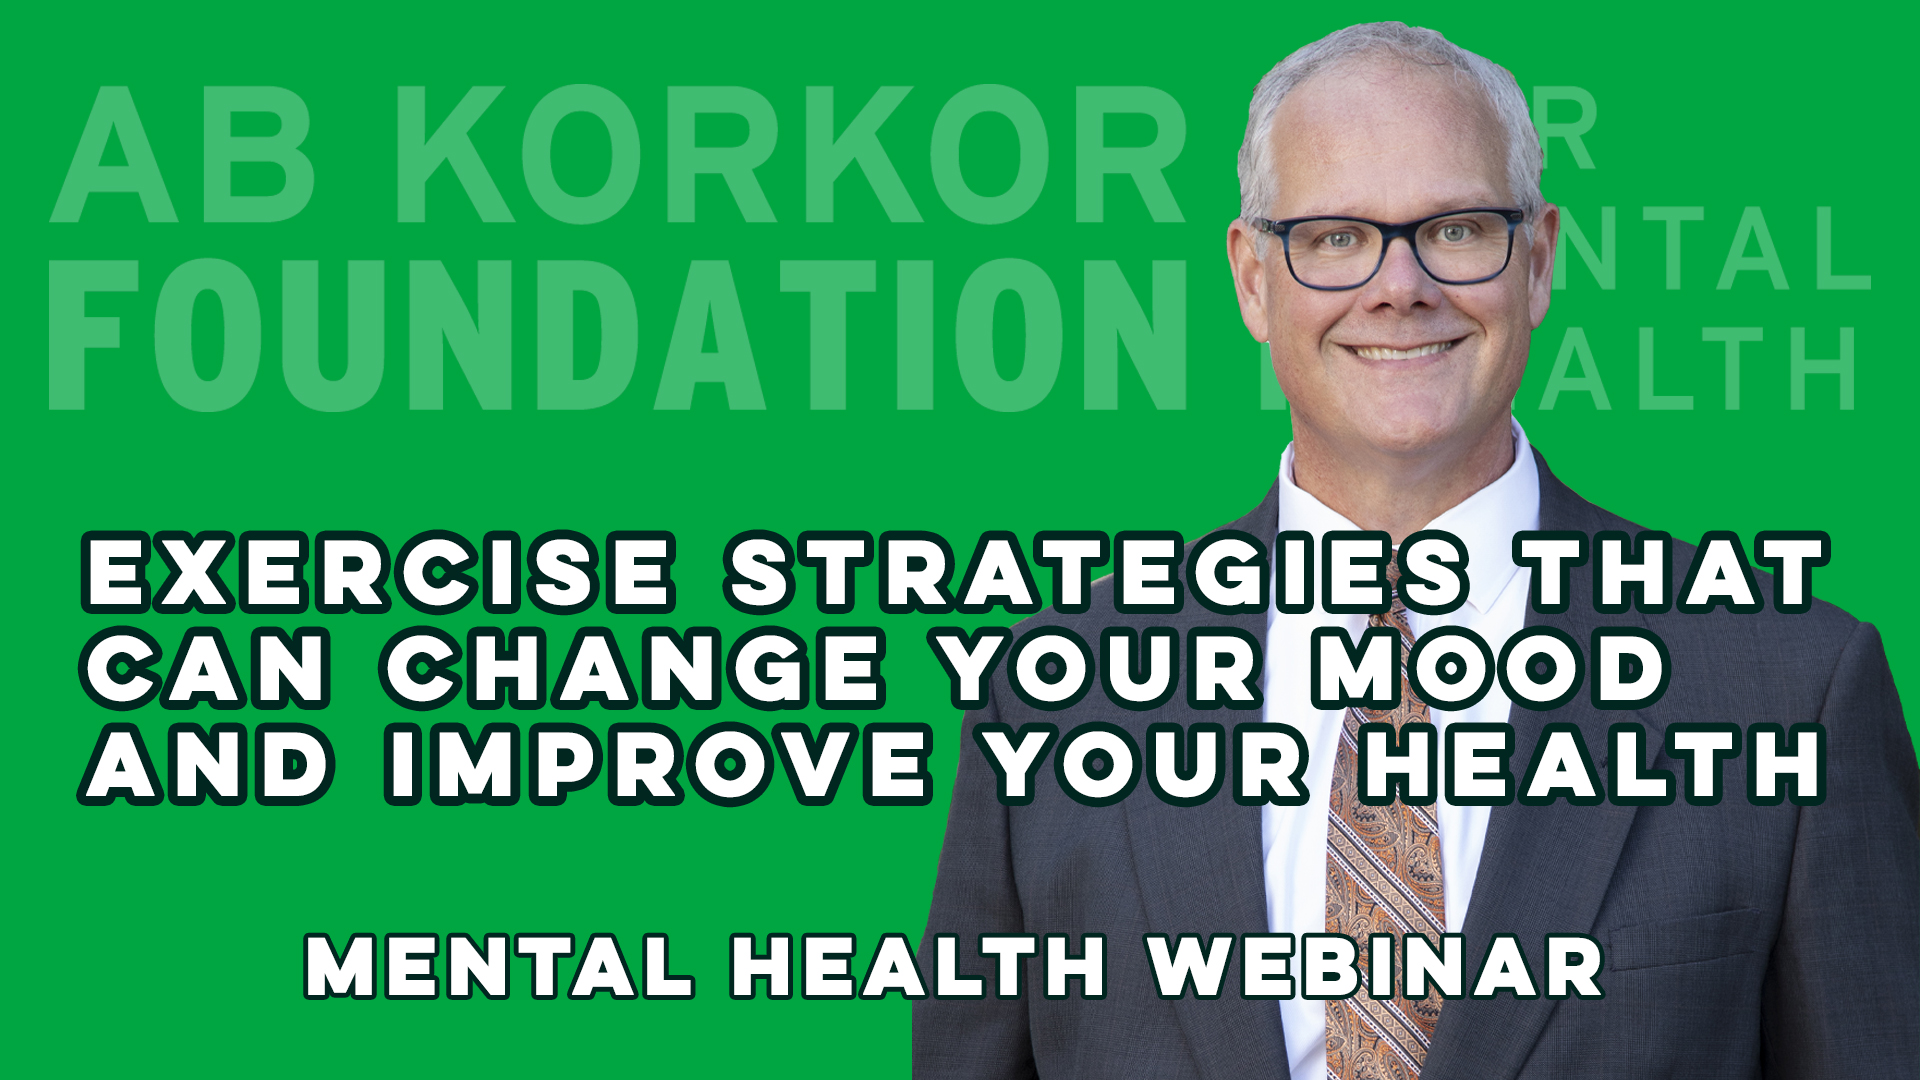 Exercise Strategies that can Change your Mood and Improve Your Health - John Bartholomew - Mental Health Webinar